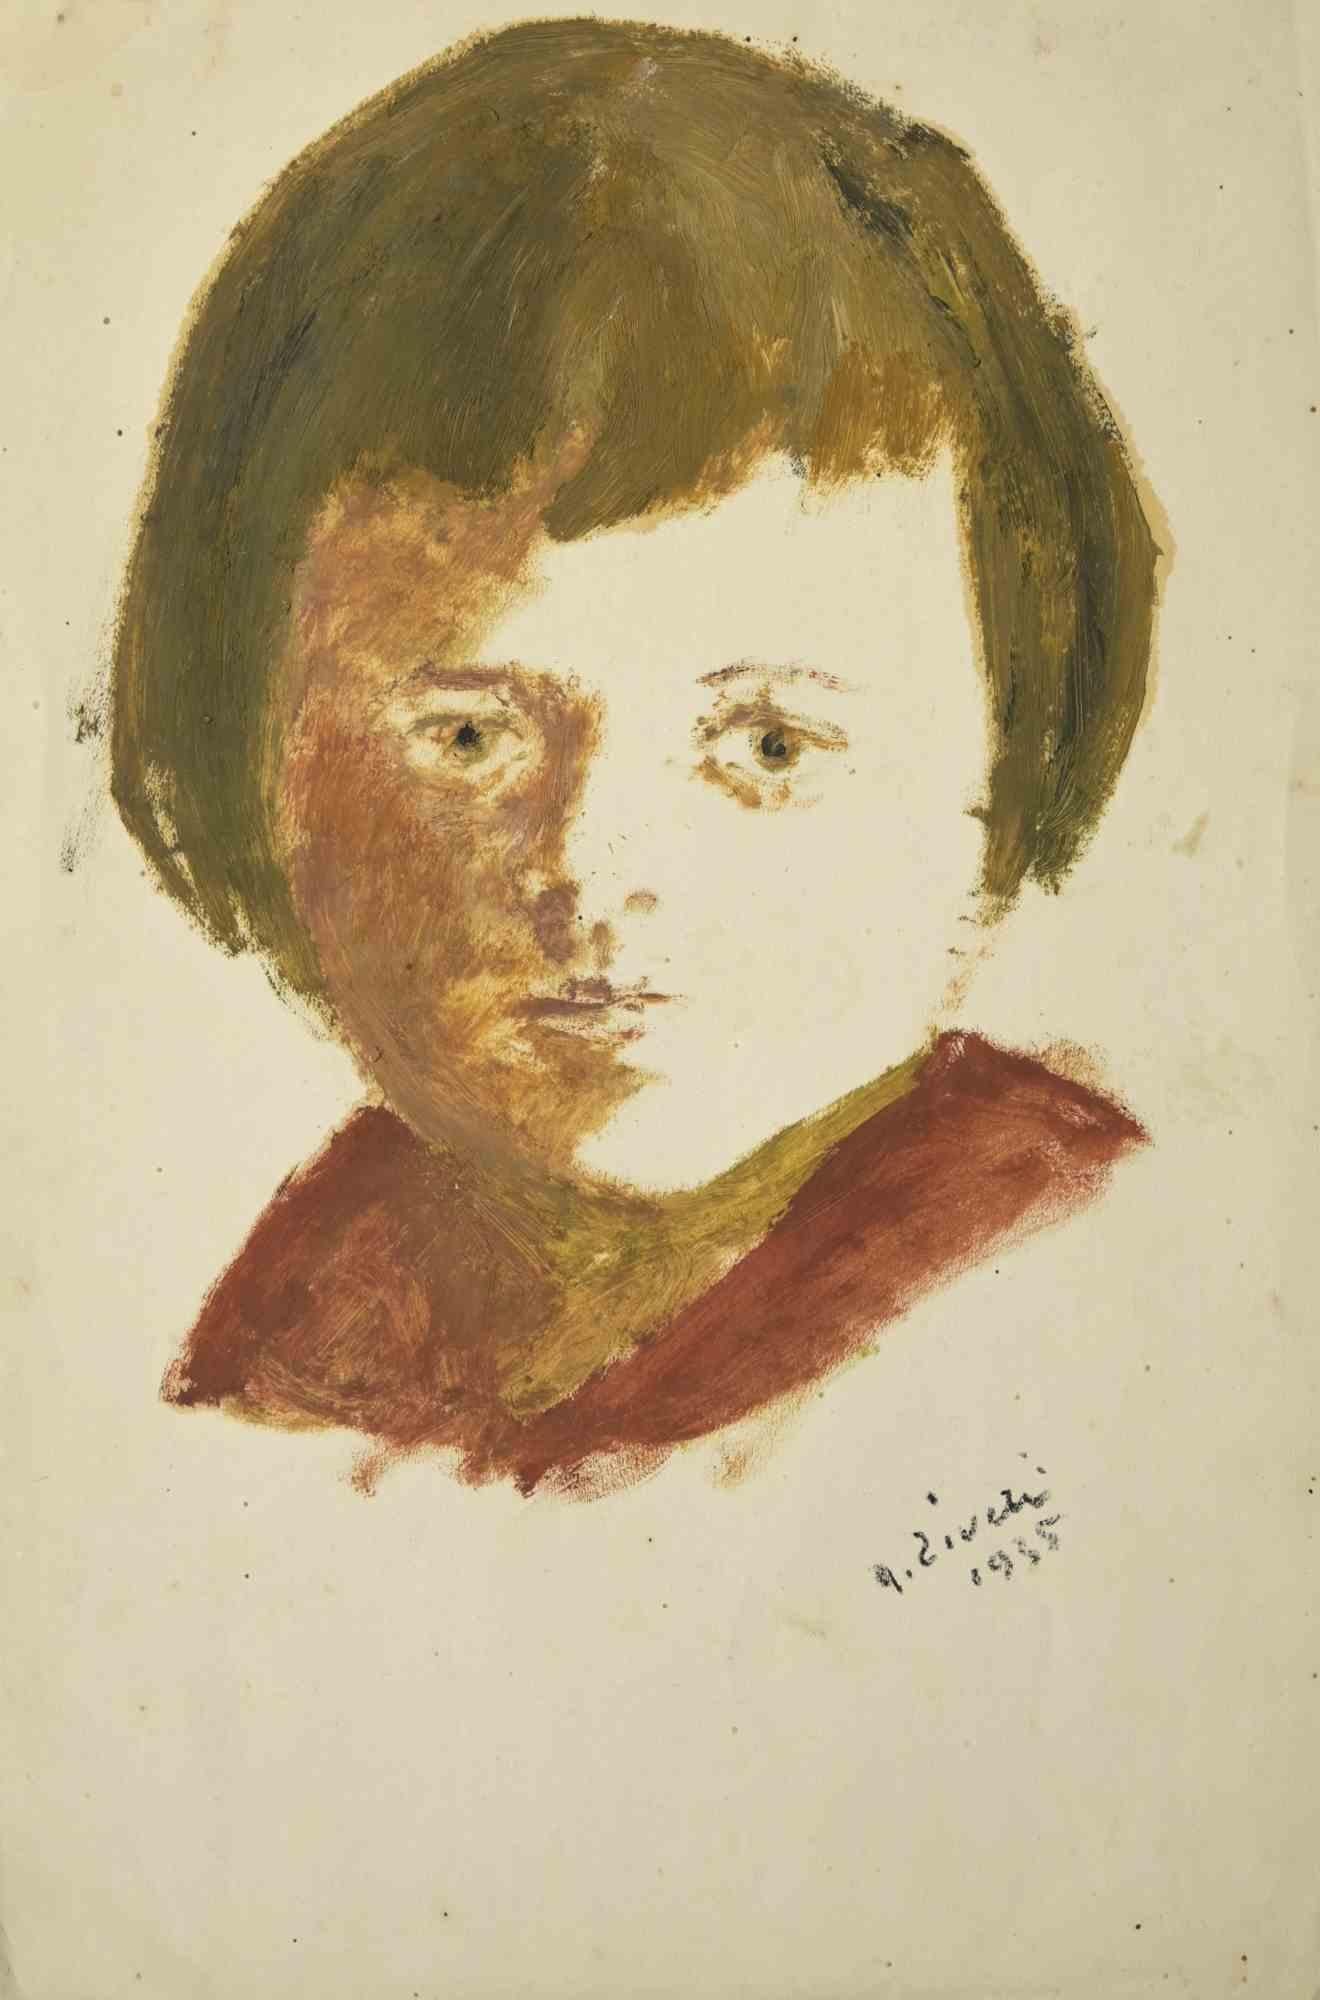 The Child's Portrait is a drawing realized by Alberto Ziveri in 1935.

Tempera on paper.

Hand-signed.

In good conditions.